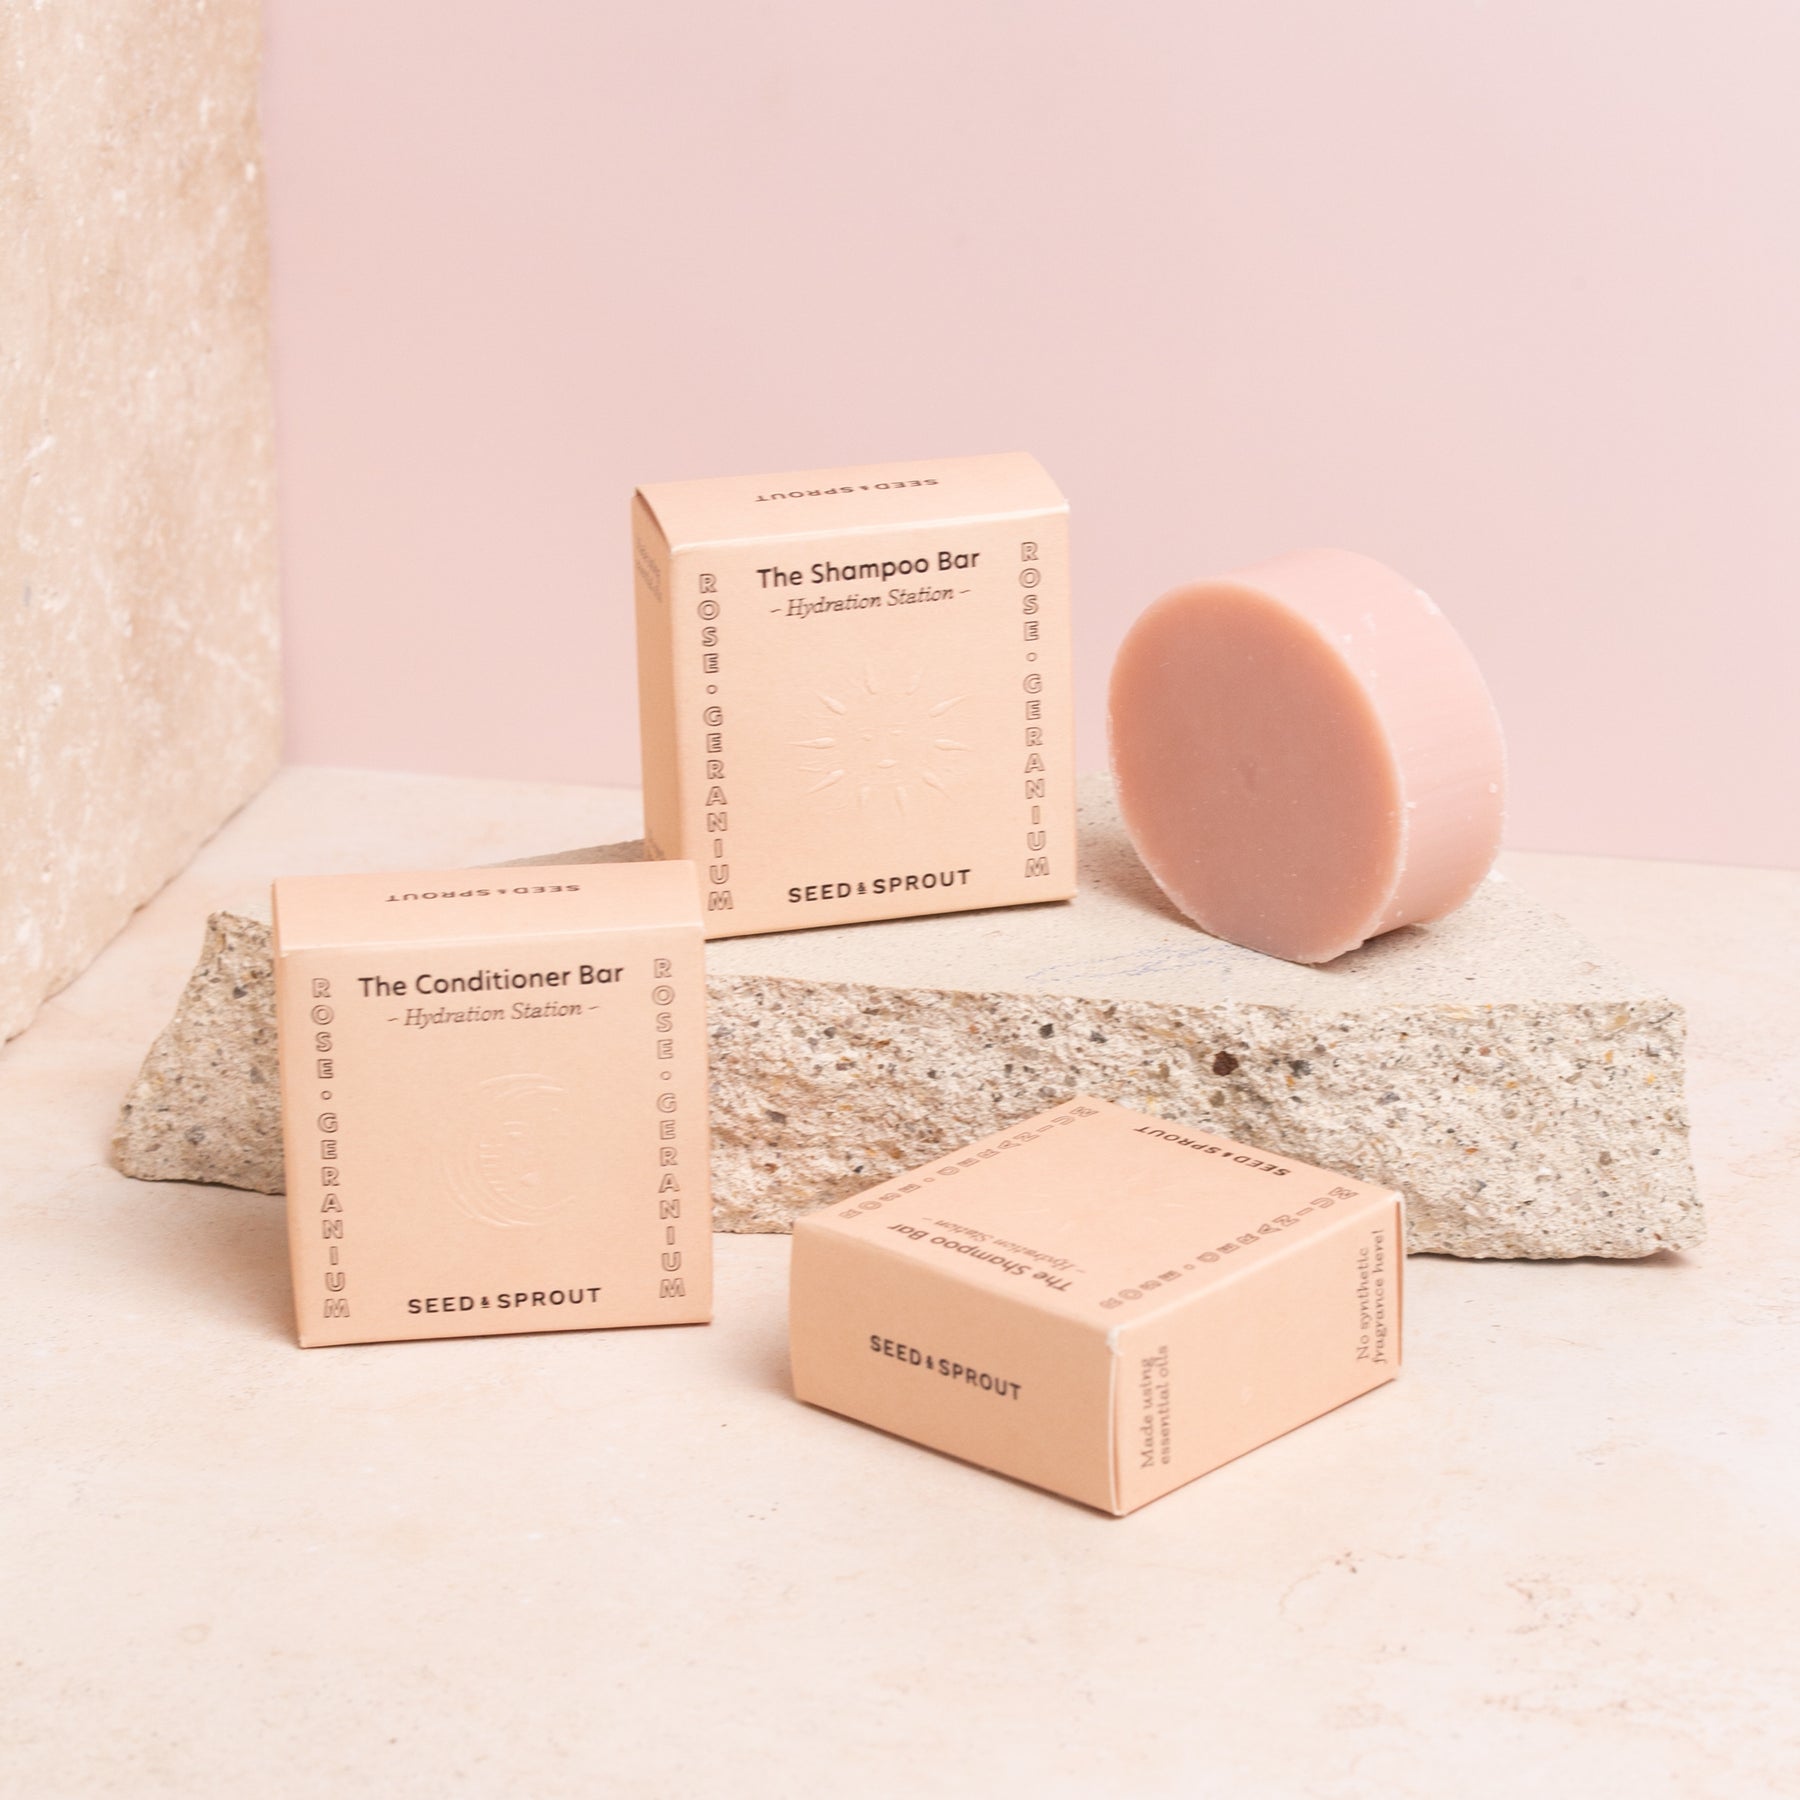 NEW In-stores! Seed & Sprout Amazing Shampoo + Conditioner Bars